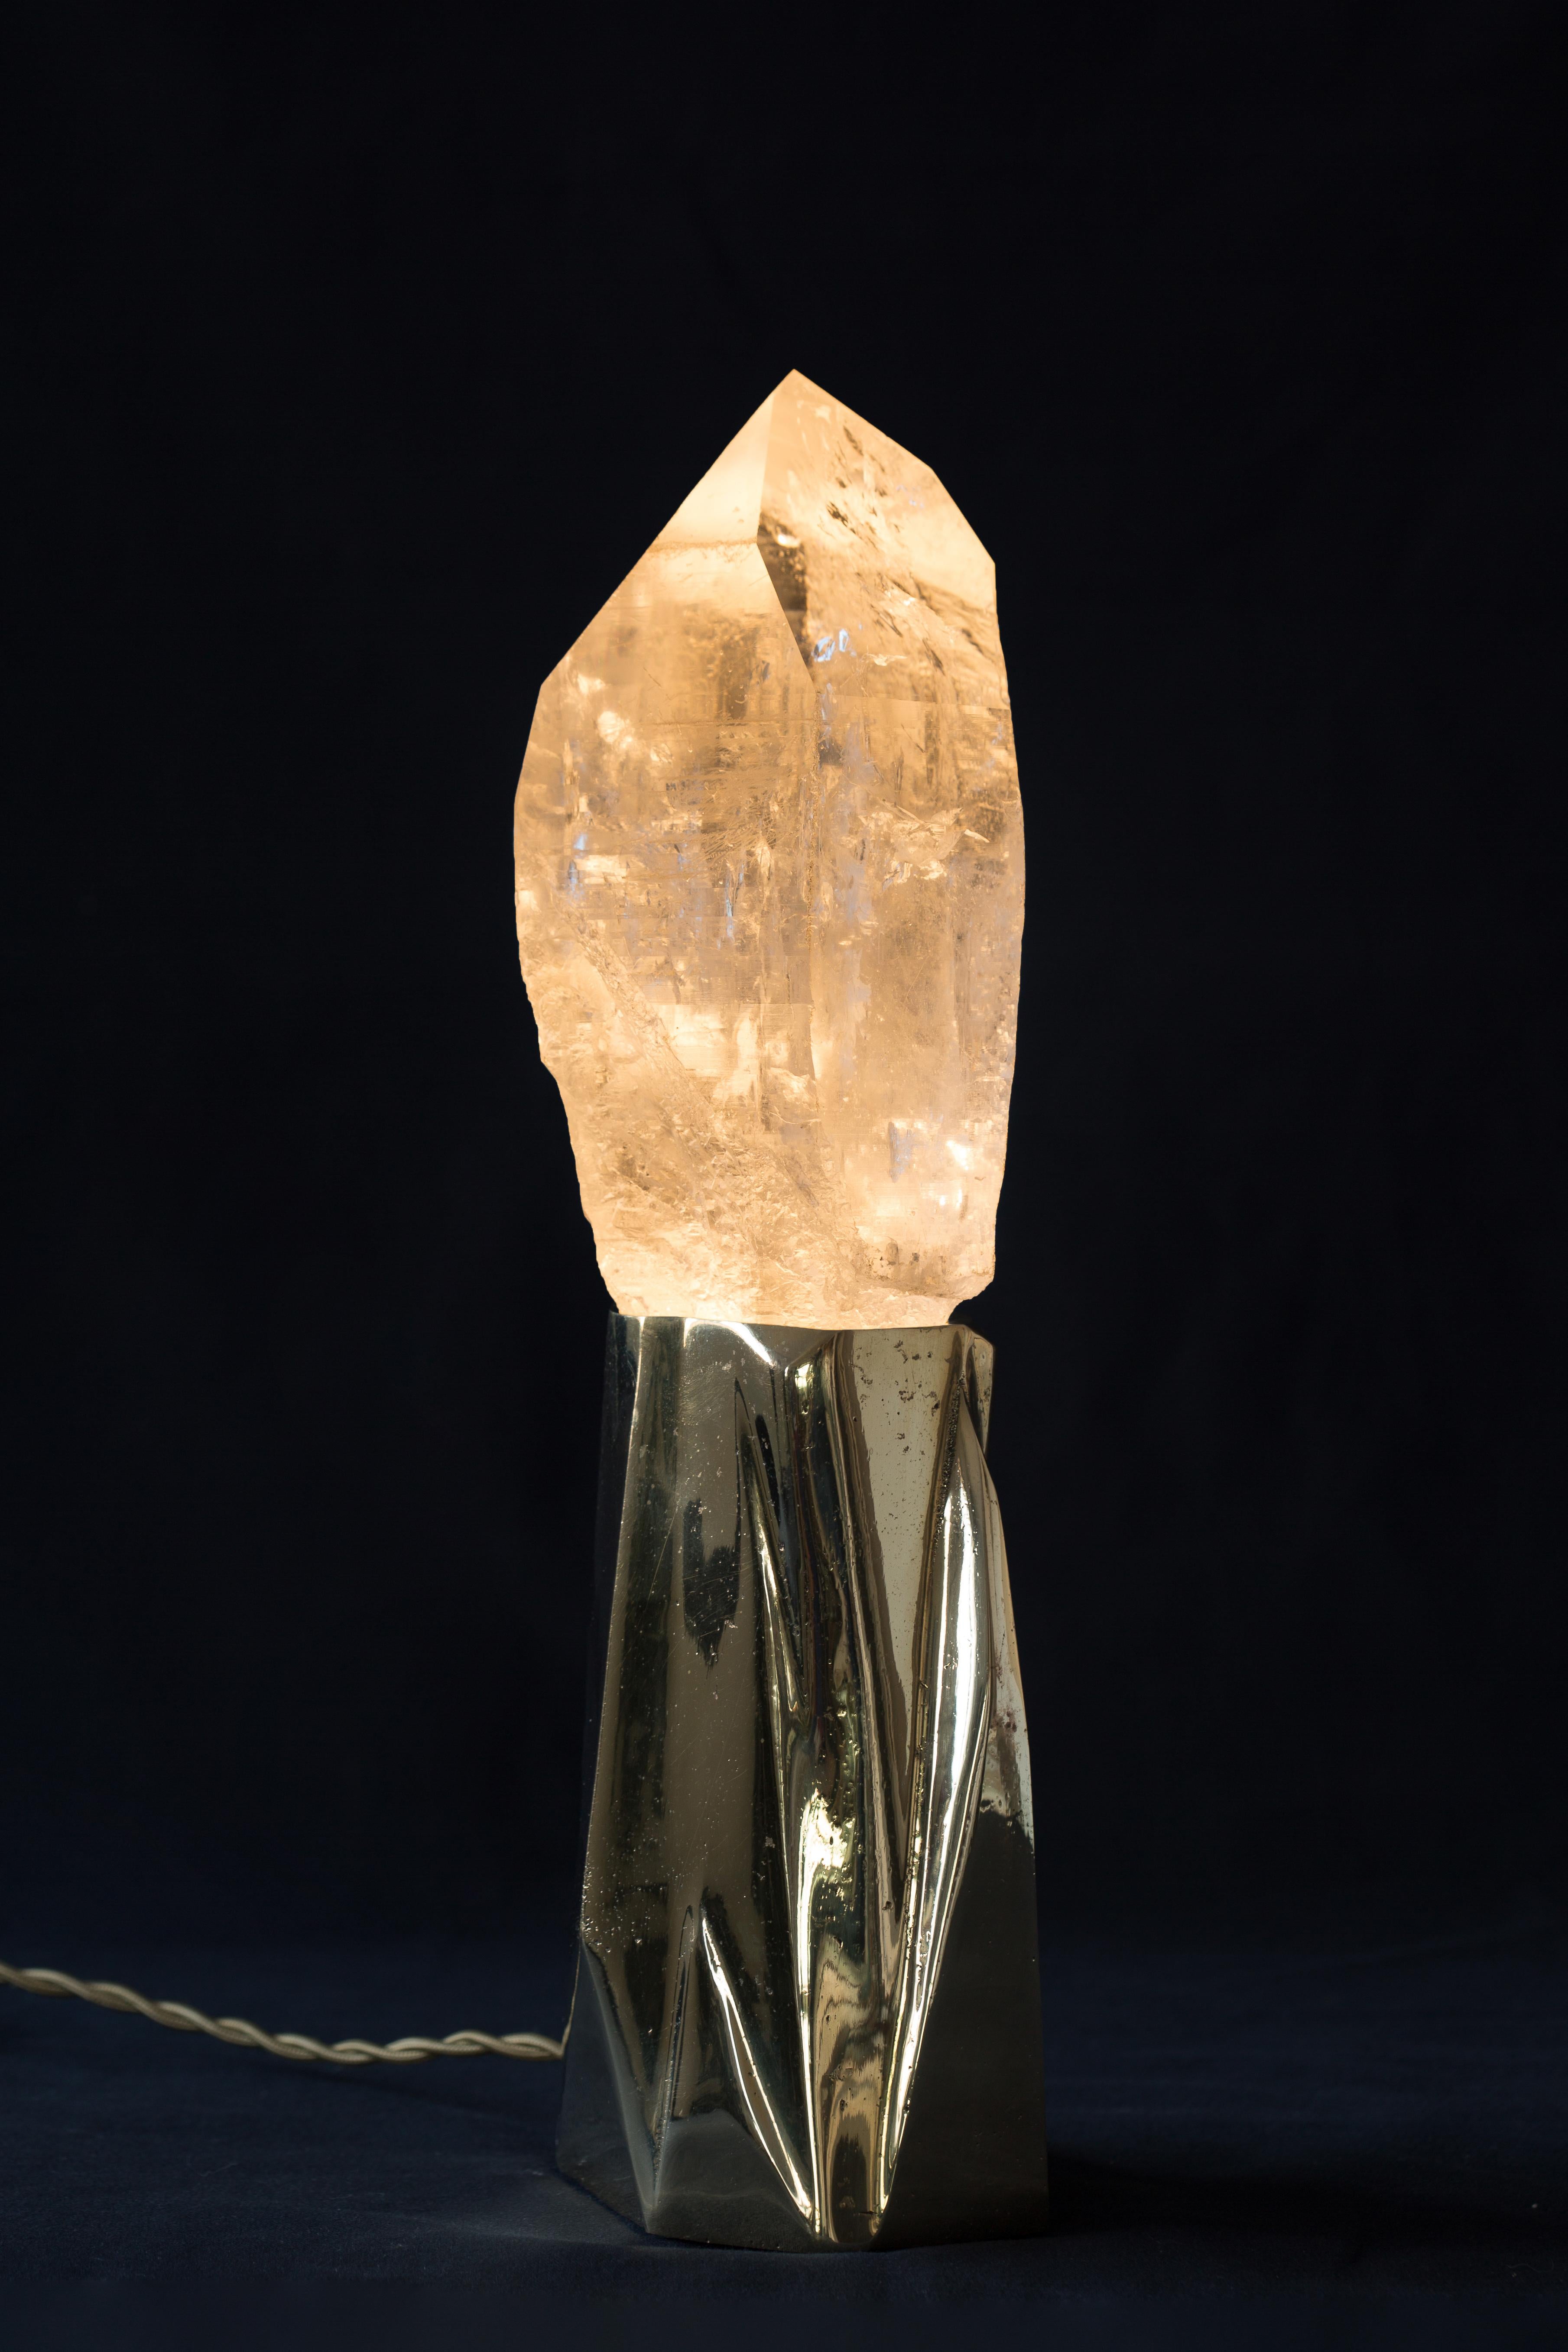 Misty natural quartz table lamp by Demian Quincke
Dimensions: diameter 13 x height 41 cm
Materials: Casted bronze, natural quartz point with bud

5 W, GU-10 Led light inside, Bi-Volt 110/220 V
3.6 kg natural quartz point, 2.7 kg casted bronze